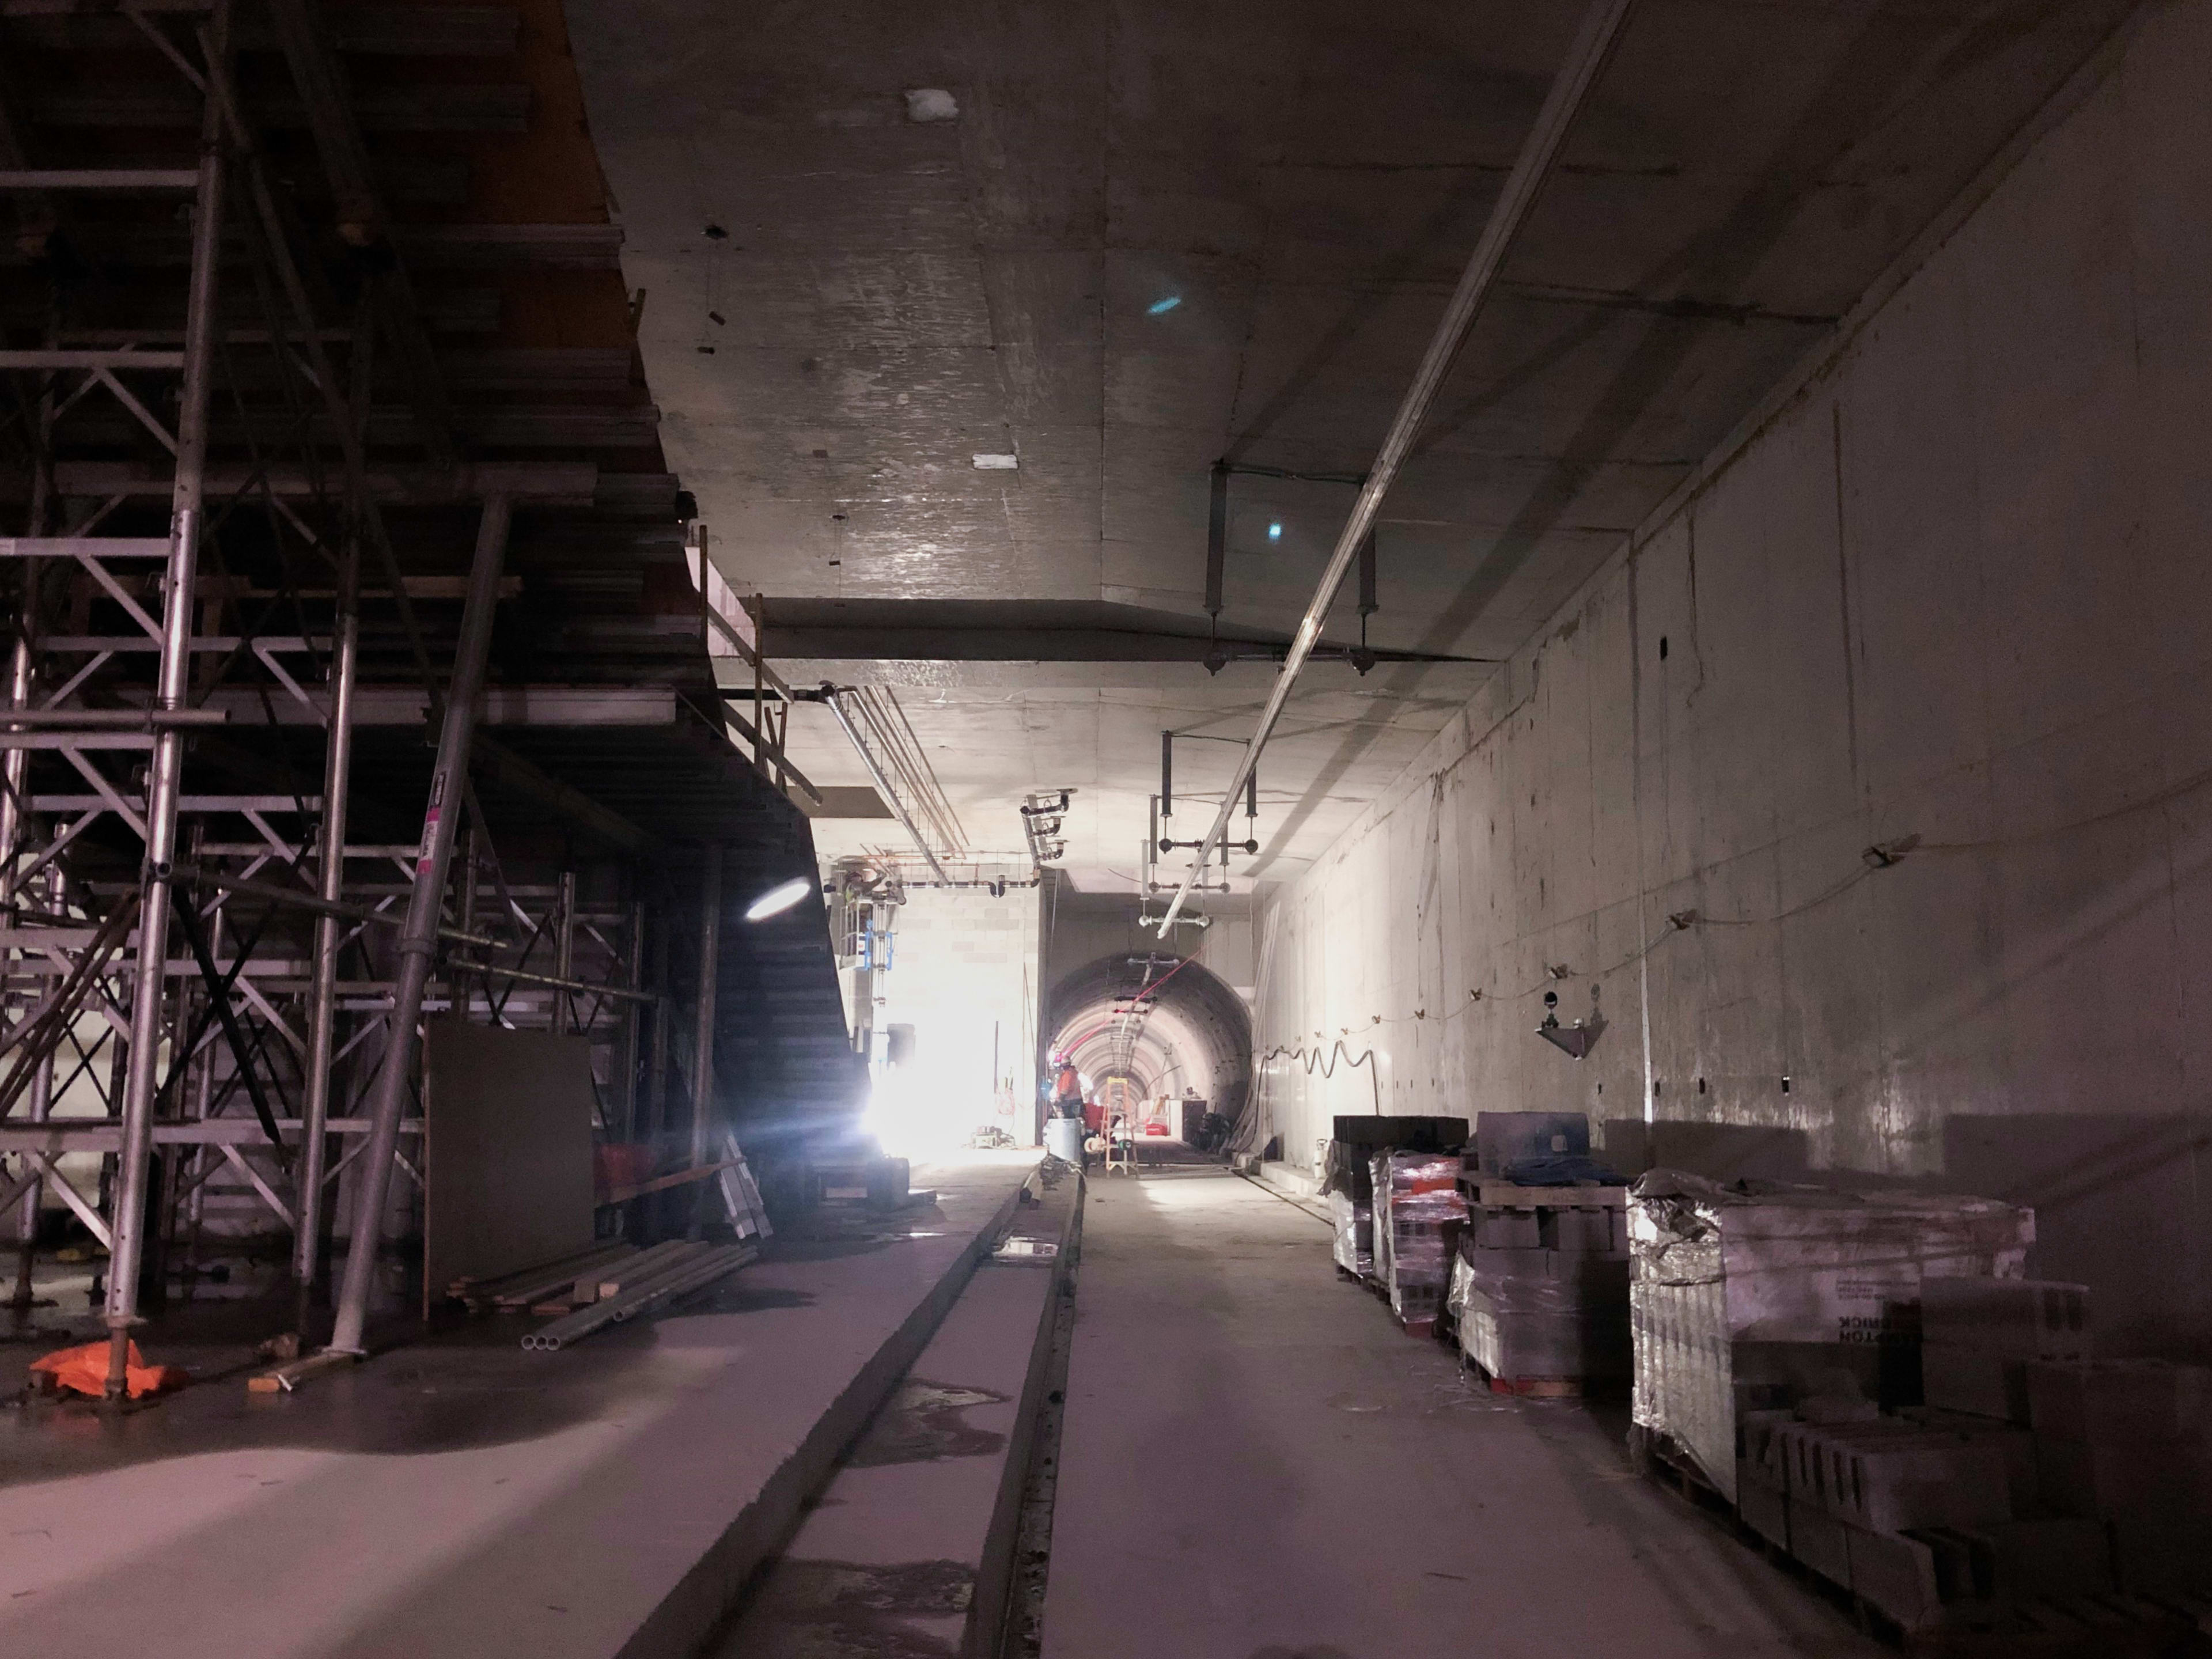 The view inside Fairbank Station with scaffolding and construction workers present